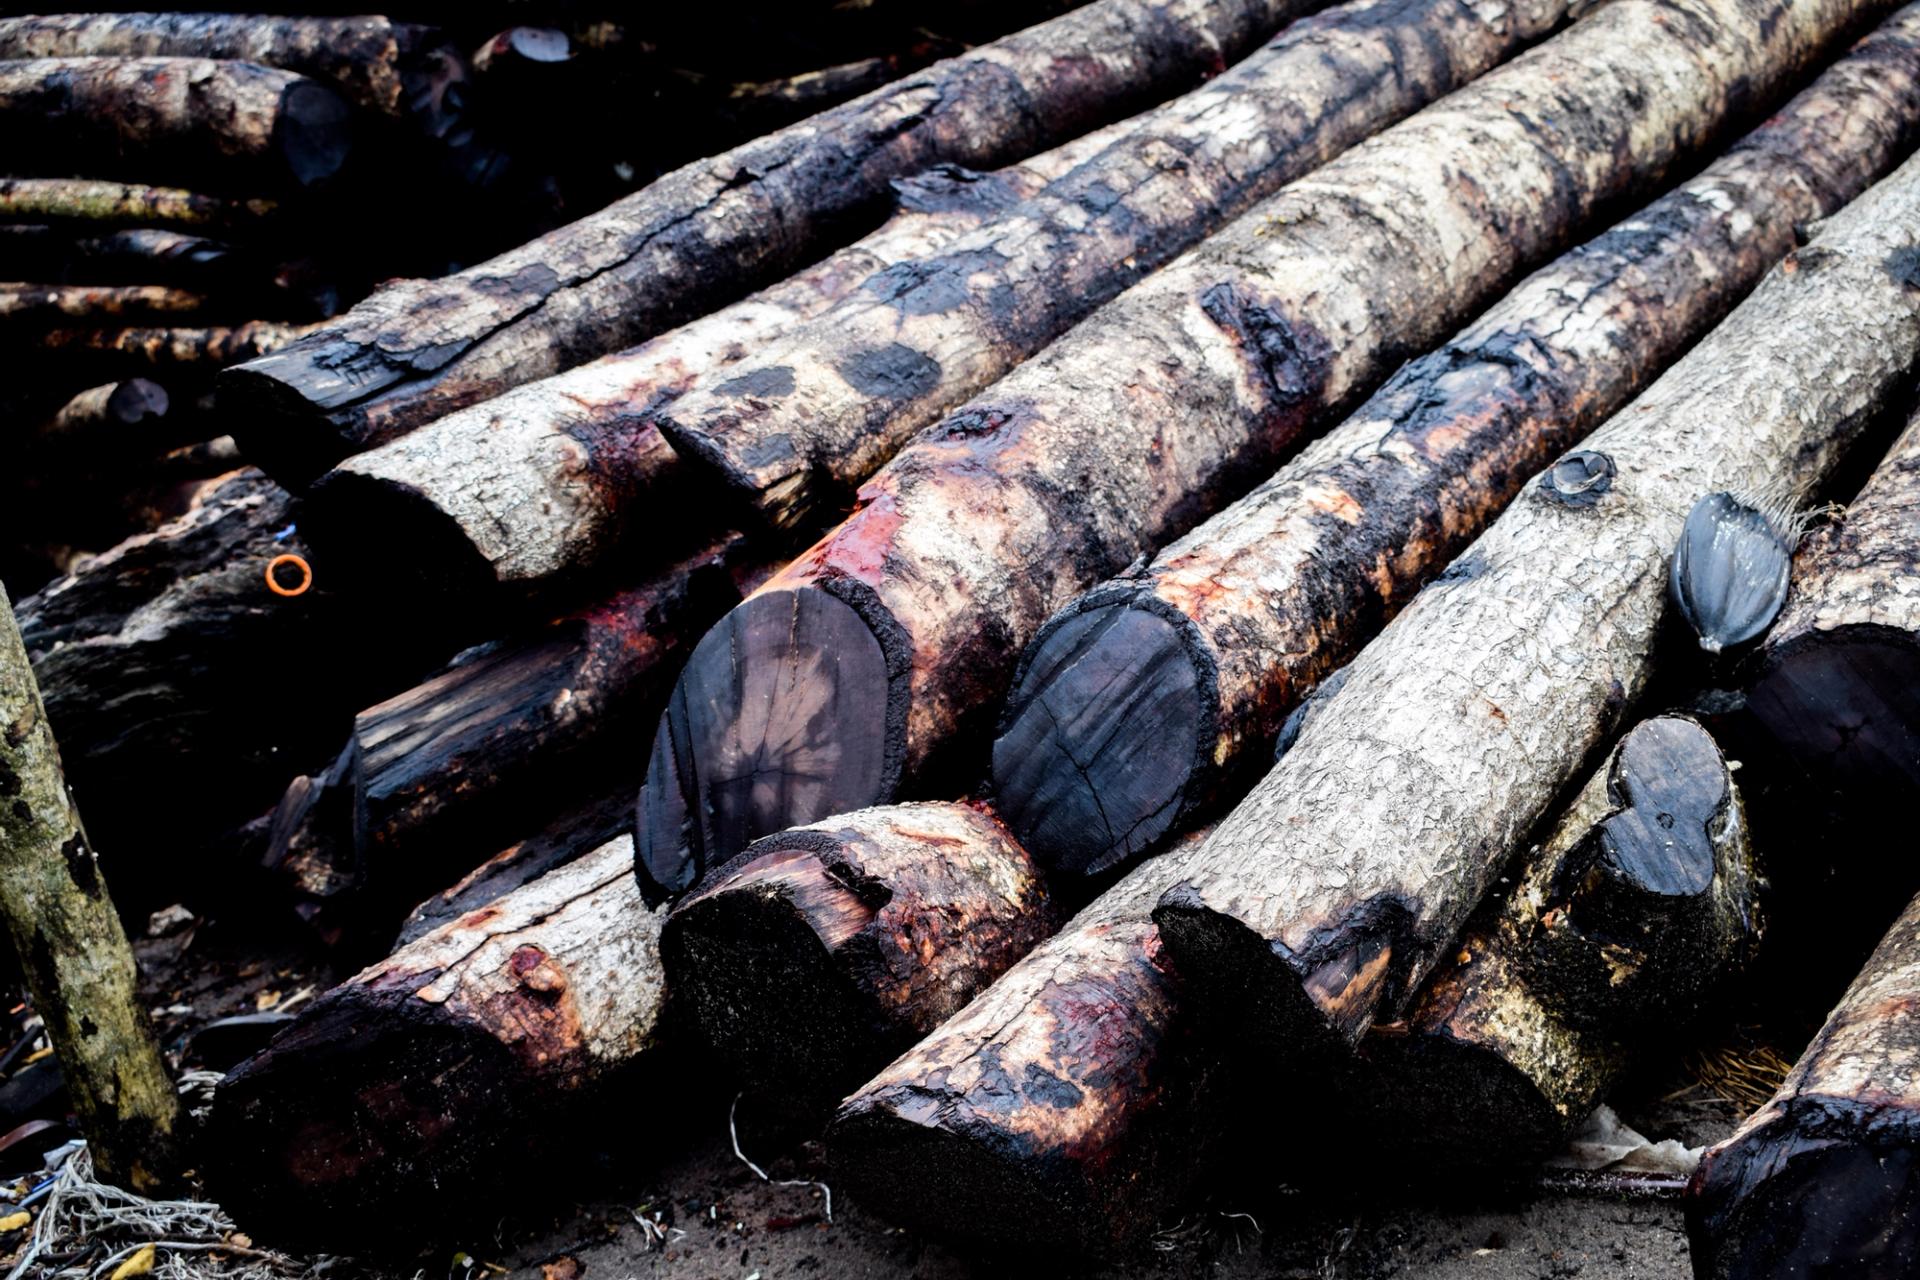 A close-up photograph of a stacked pile of 10 to 15 logs, showing their cut ends